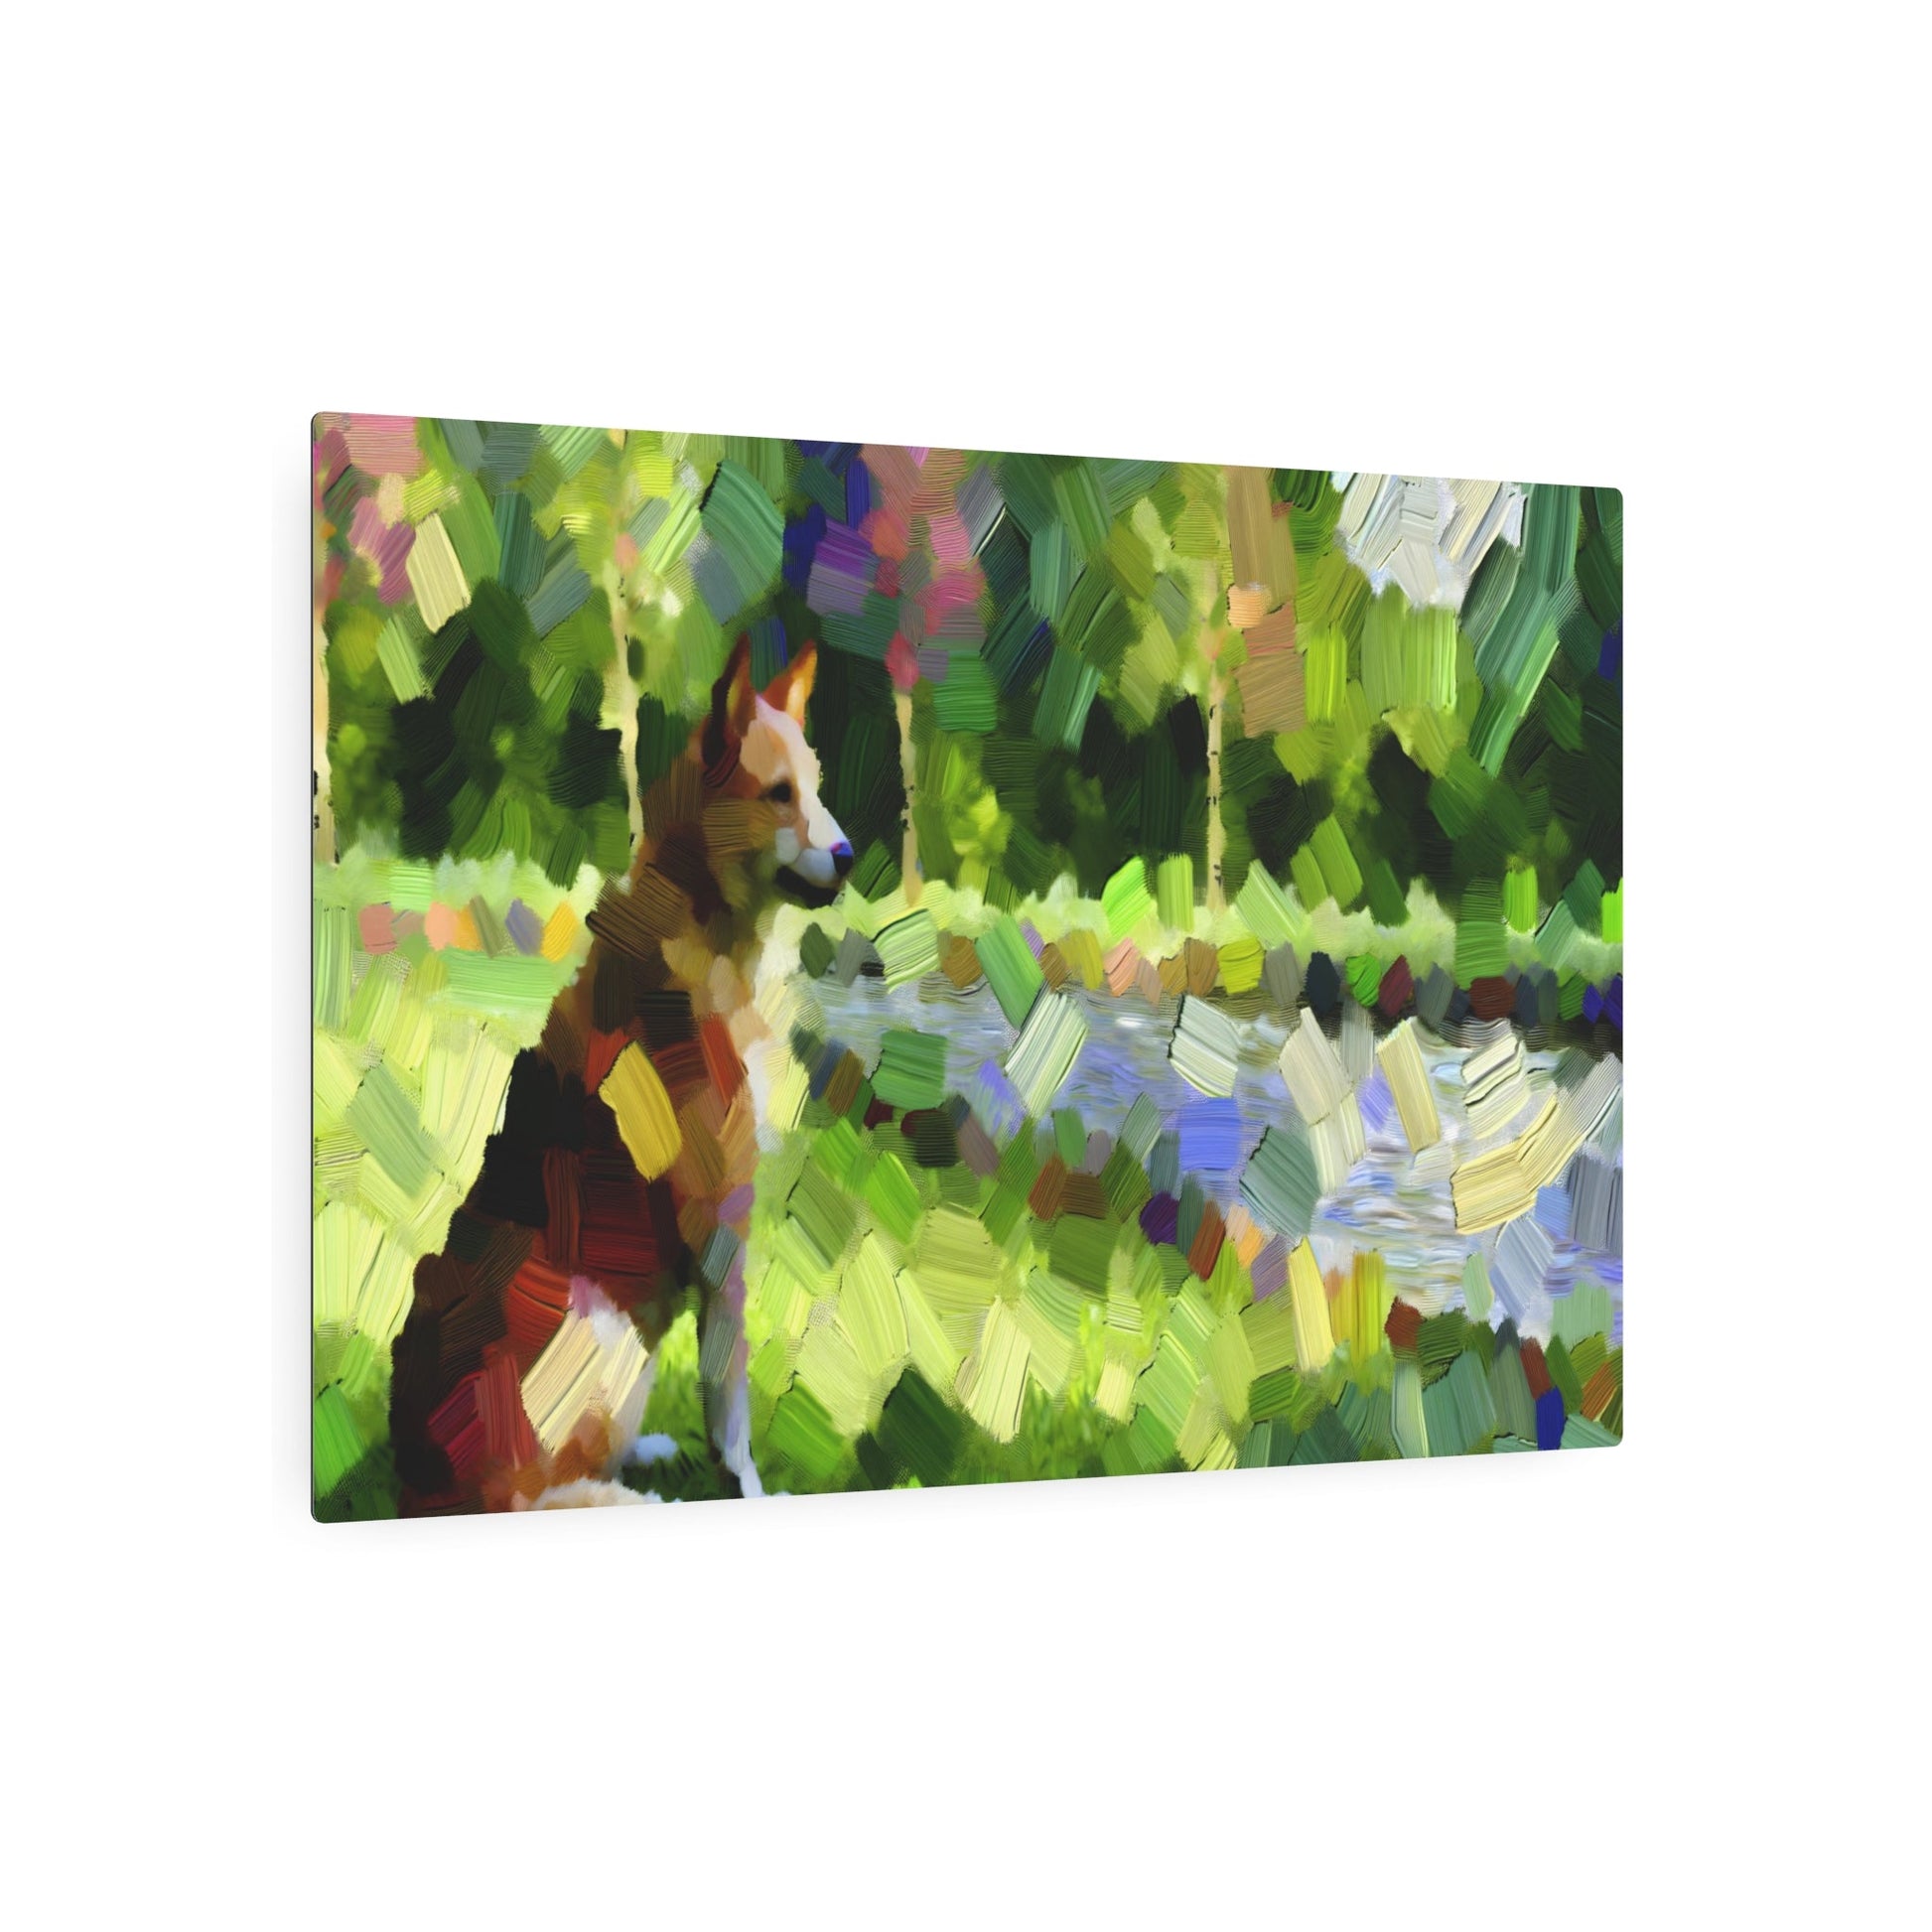 Metal Poster Art | "Impressionistic Western Art Style - Vibrant Outdoor Scene with Domesticated Dog, Emphasizing Light Variations and Loose Brush Strokes" - Metal Poster Art 36″ x 24″ (Horizontal) 0.12''